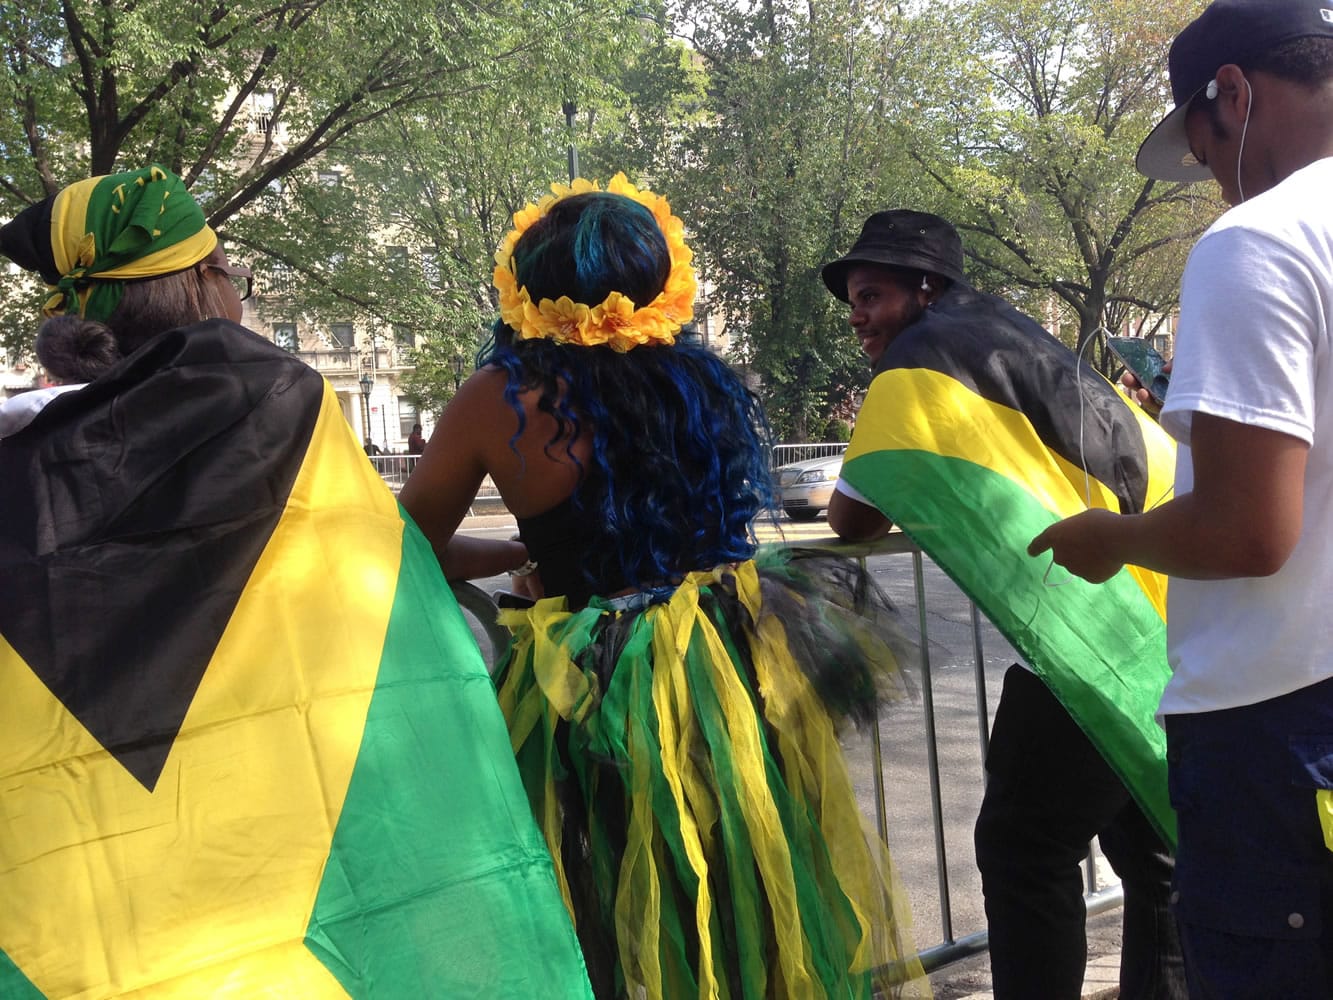 Spectators wearing the colors of the Jamaican flag wait behind barriers for the annual West Indian Day Parade to start along Brooklyn's Eastern Parkway in New York on Monday.